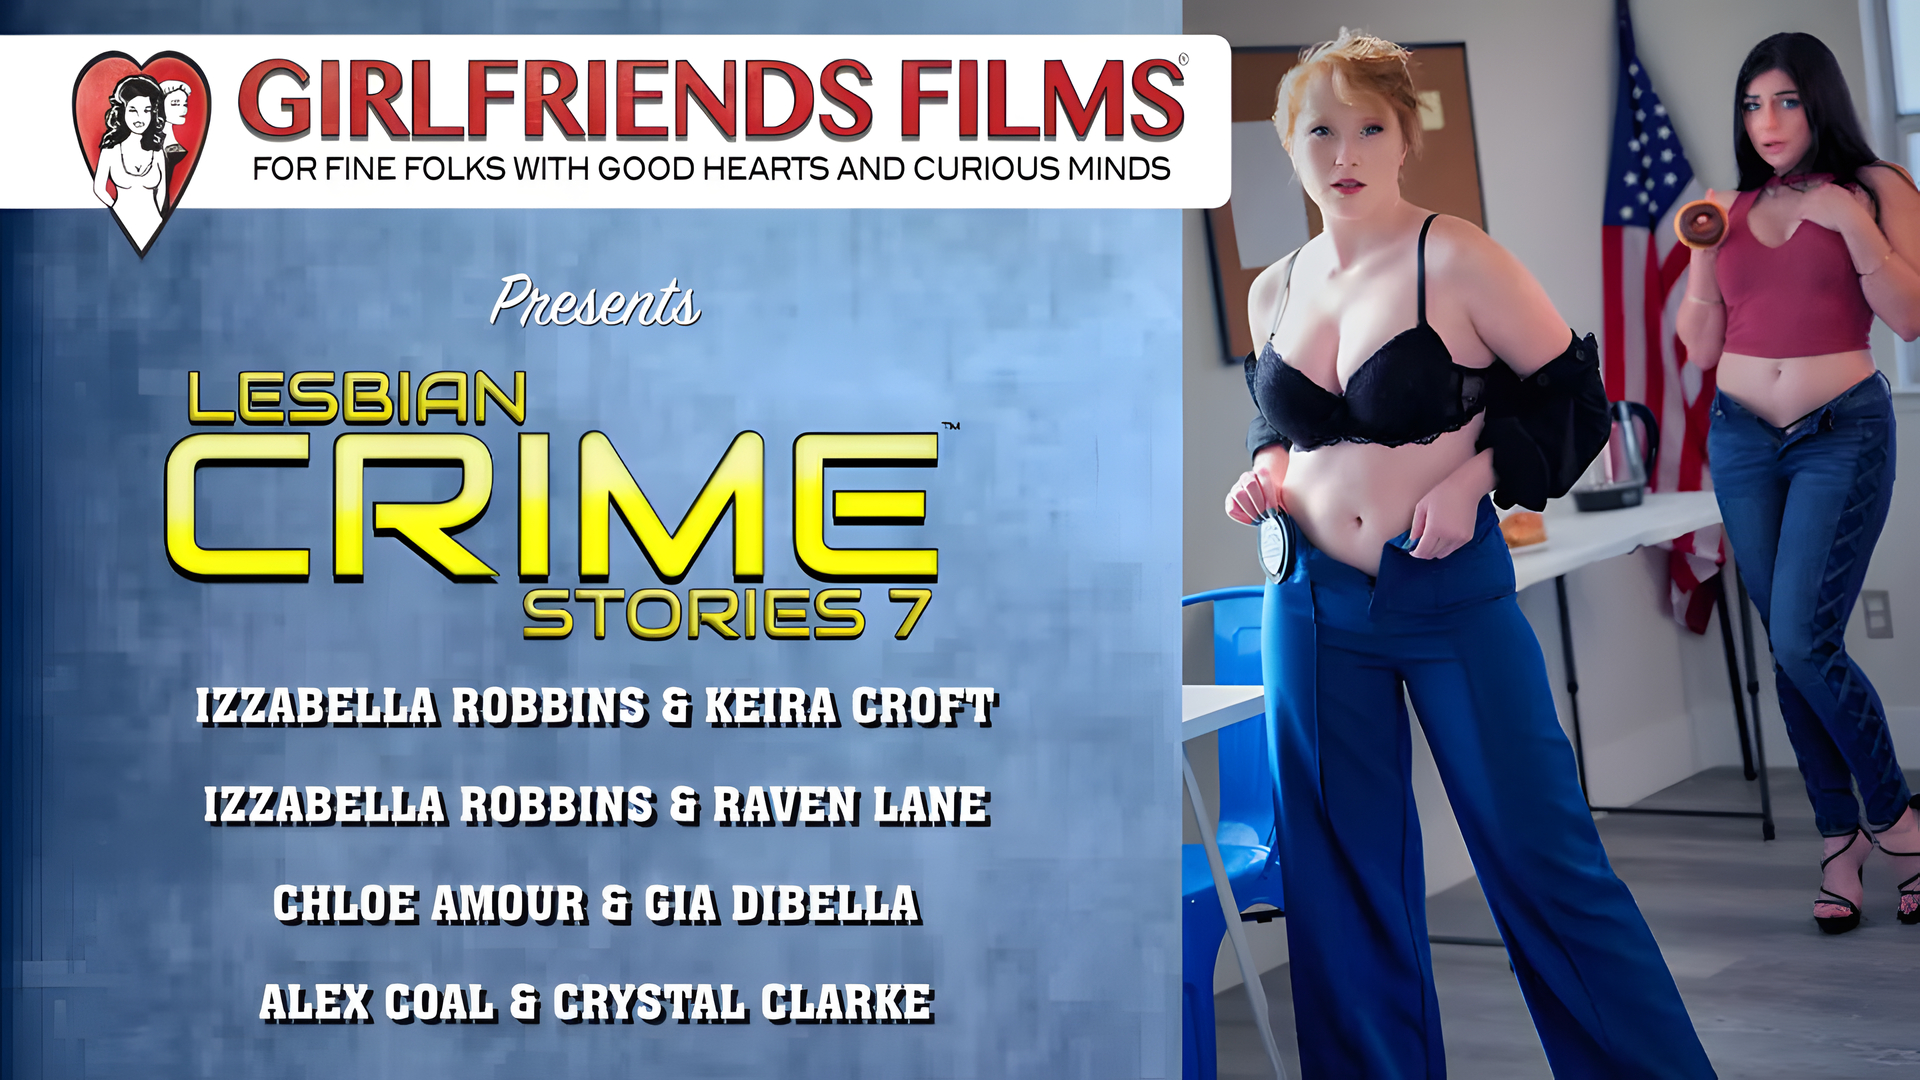 “Lesbian Crime Stories 7”: A Cinematic Exploration by Girlfriends Films